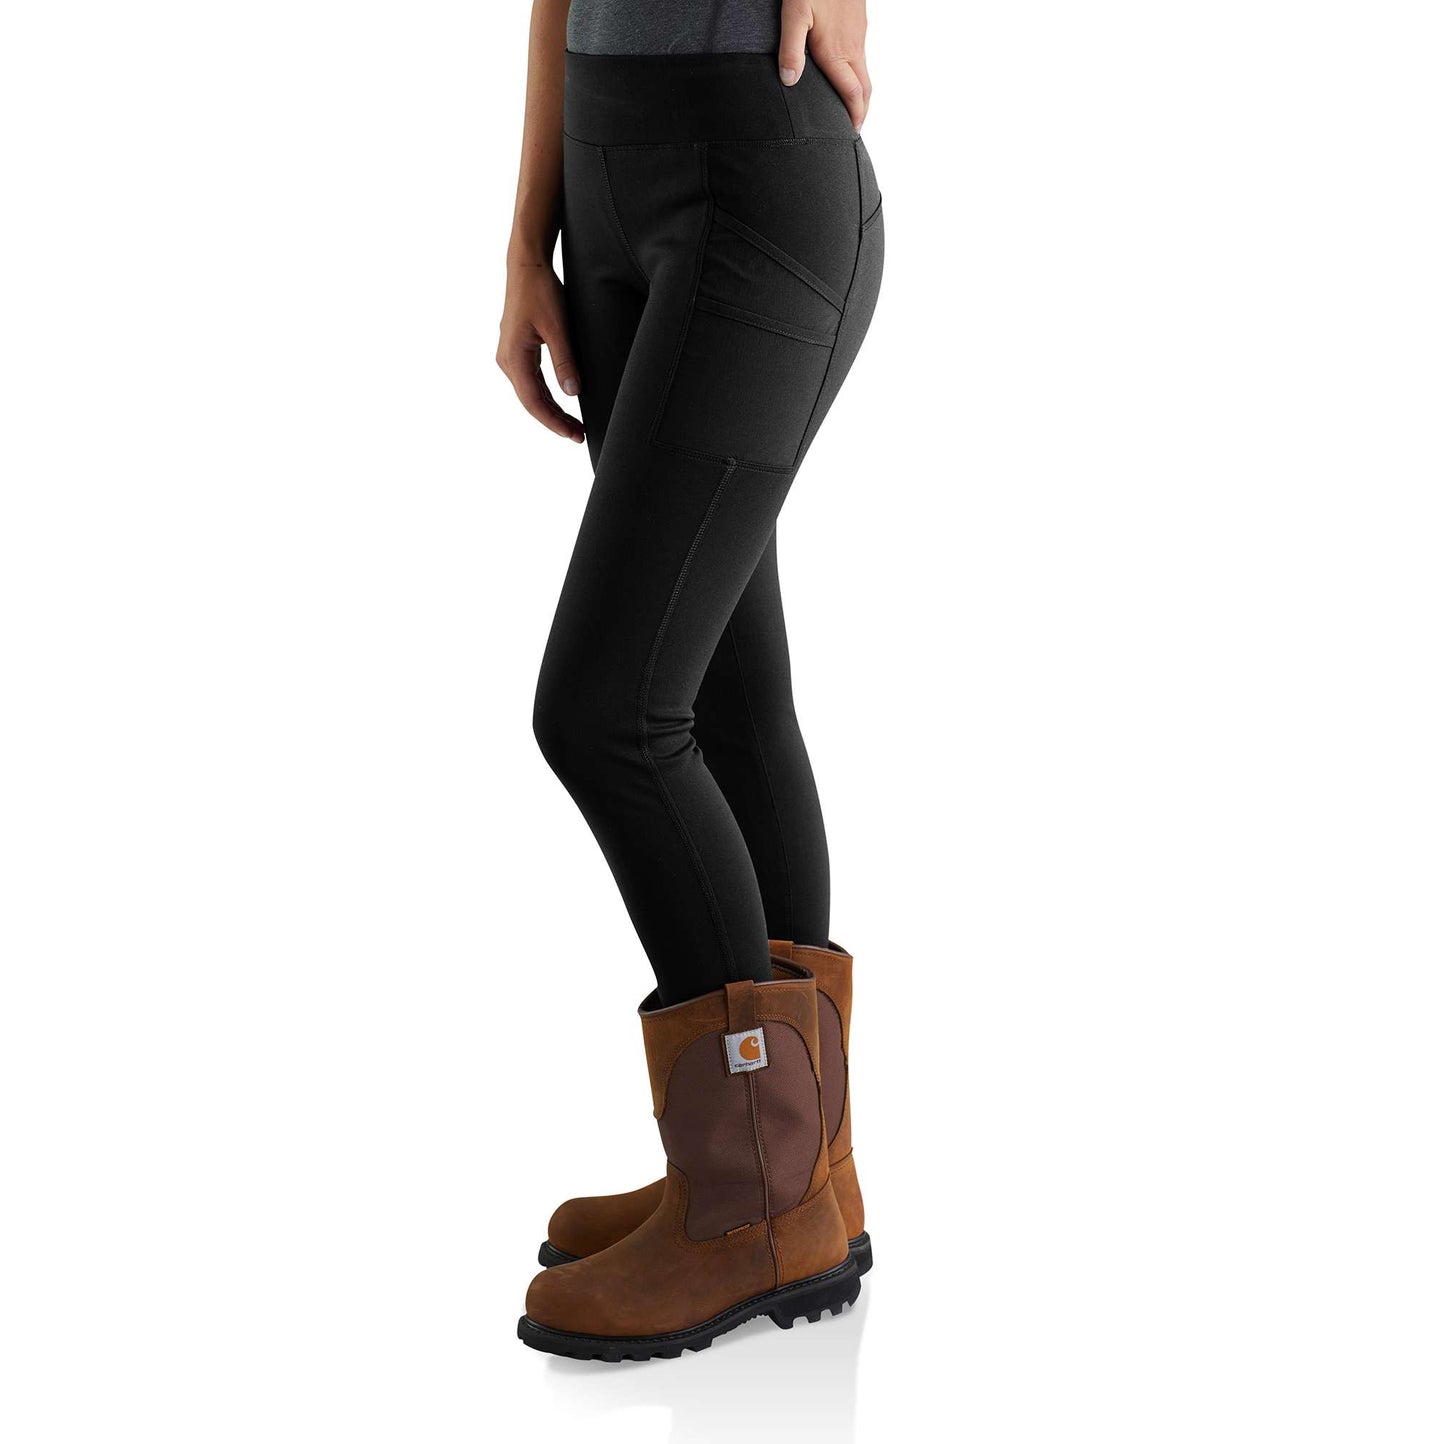 Carhartt Force® Fitted Lightweight Utility Legging